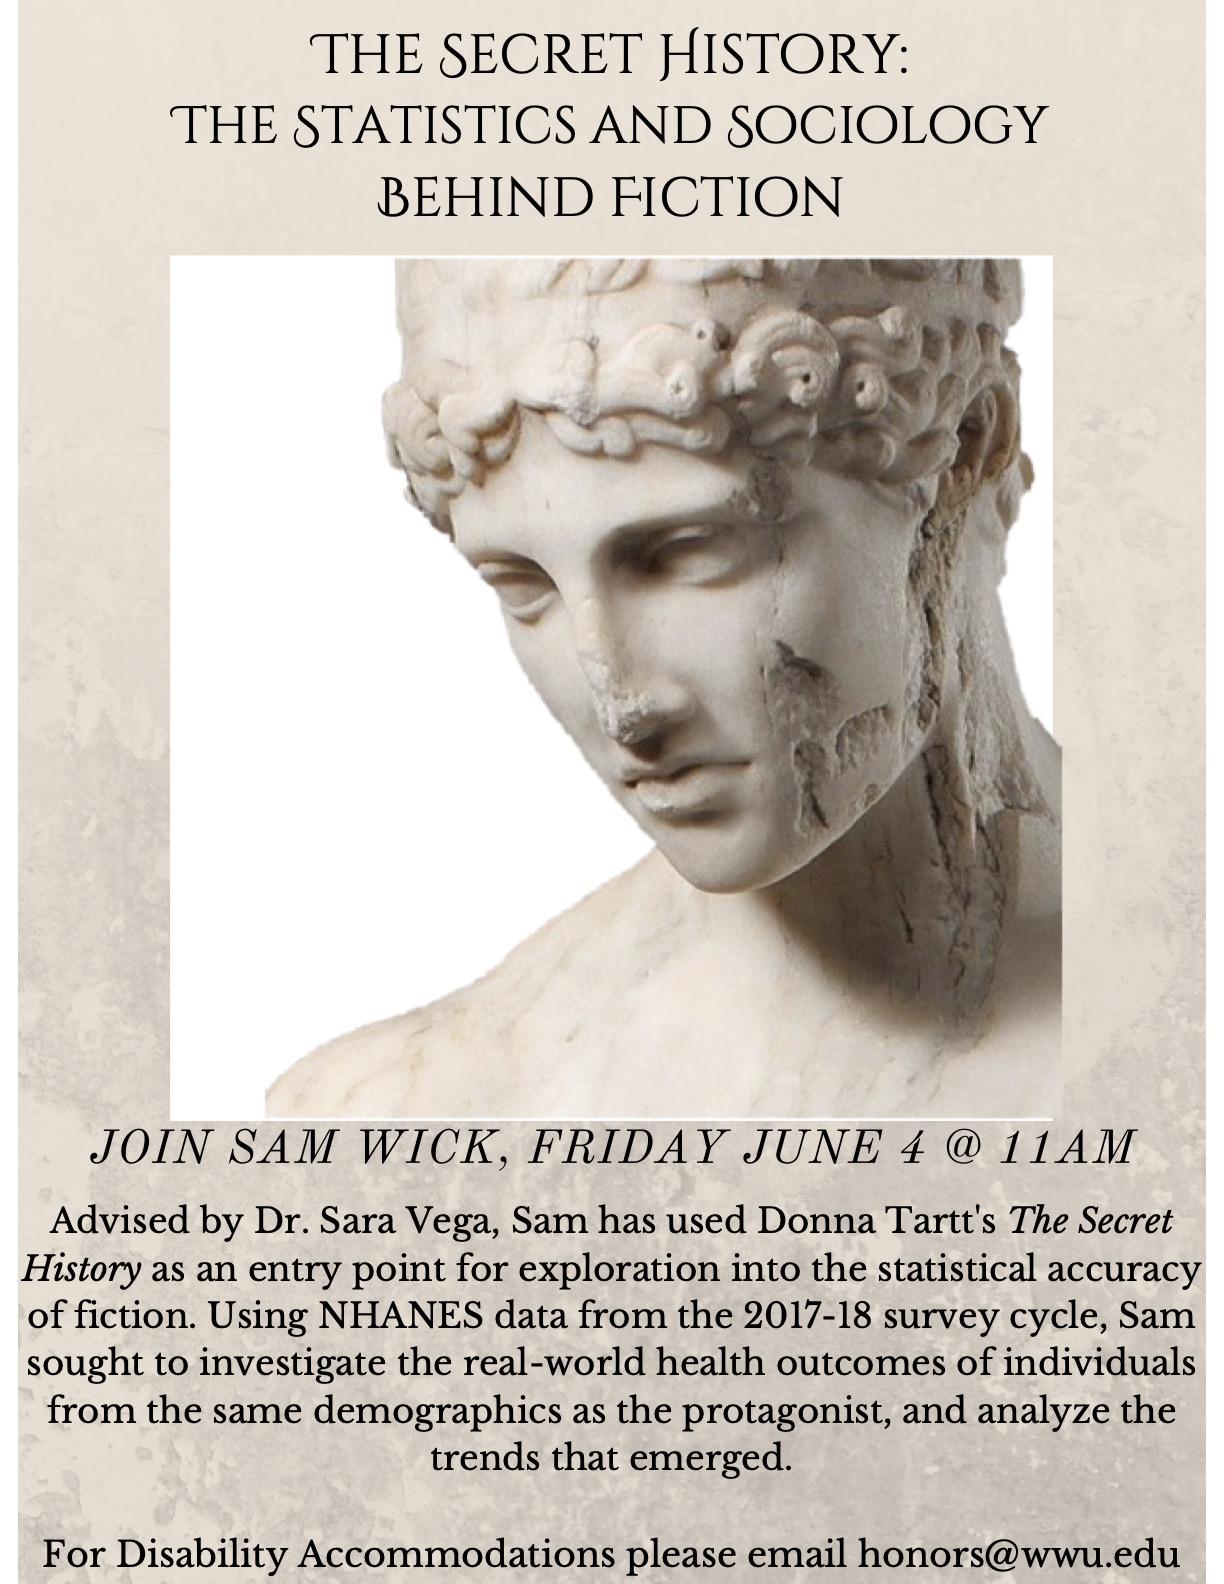 Photo of an ancient Greek statue. Text: "The Secret History: The Statistics & Sociology Behind Fiction. Sam Wick, June 4 @ 11AM. Advised by Dr Sara Vega, with Donna Tartt’s The Secret History as an entry point for exploration into the statistical accuracy of fiction. Using NHANES data from the 2017-18 survey cycle, Sam seeks to investigate real-world health outcomes of individuals from the same demographics as the protagonist & analyze trends that emerged. For Disability Accommodations email honors@wwu.edu"